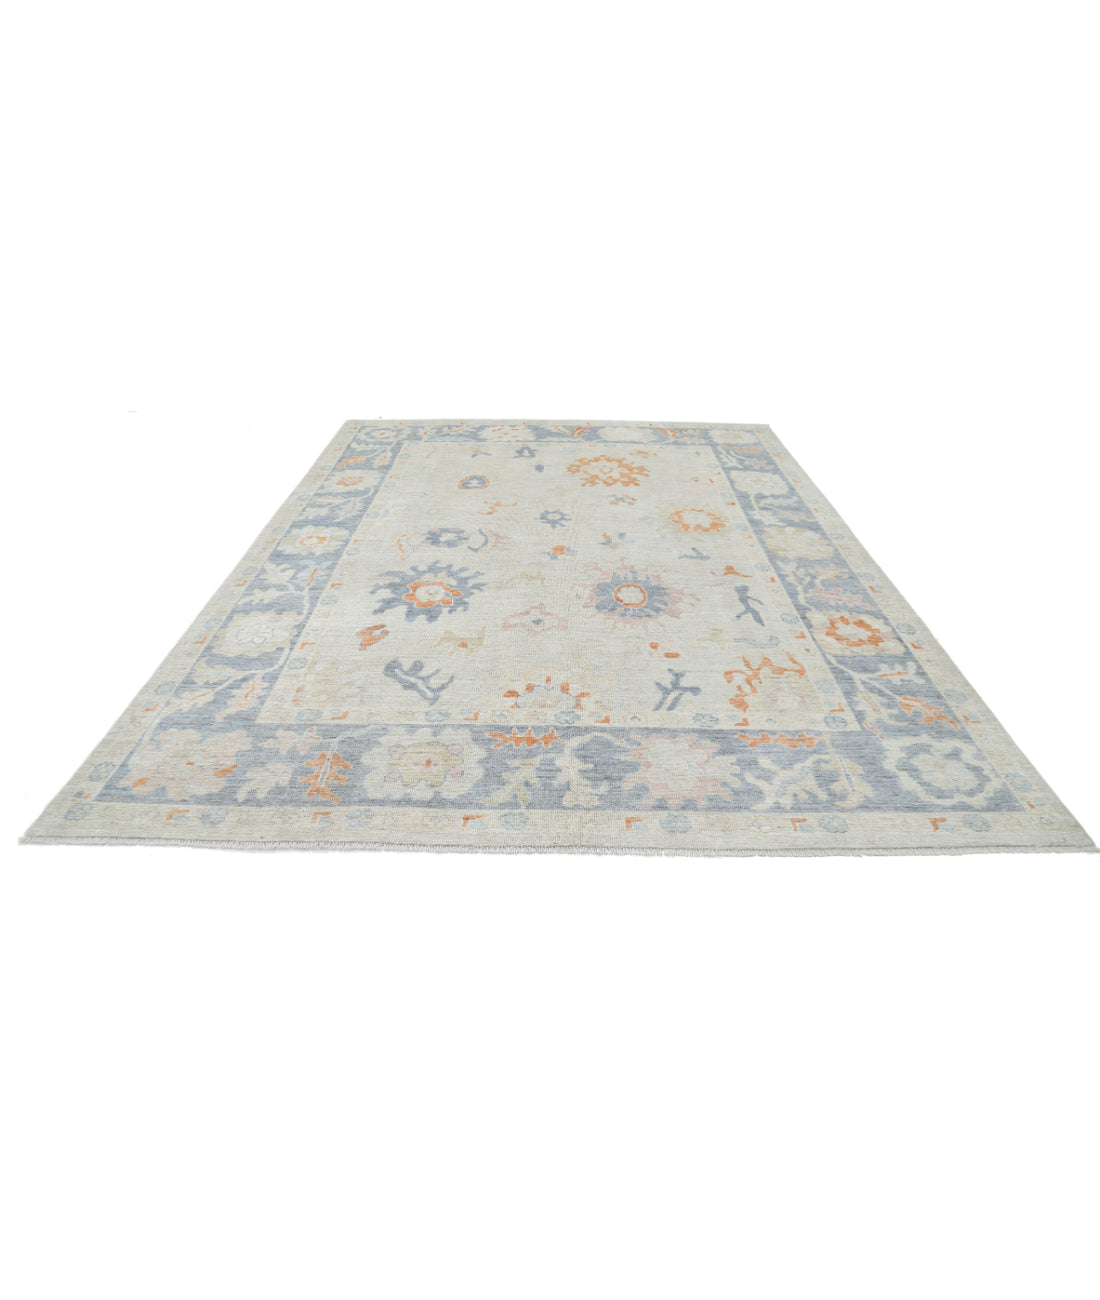 Hand Knotted Oushak Wool Rug - 8'11'' x 12'4'' 8'11'' x 12'4'' (268 X 370) / Beige / Grey